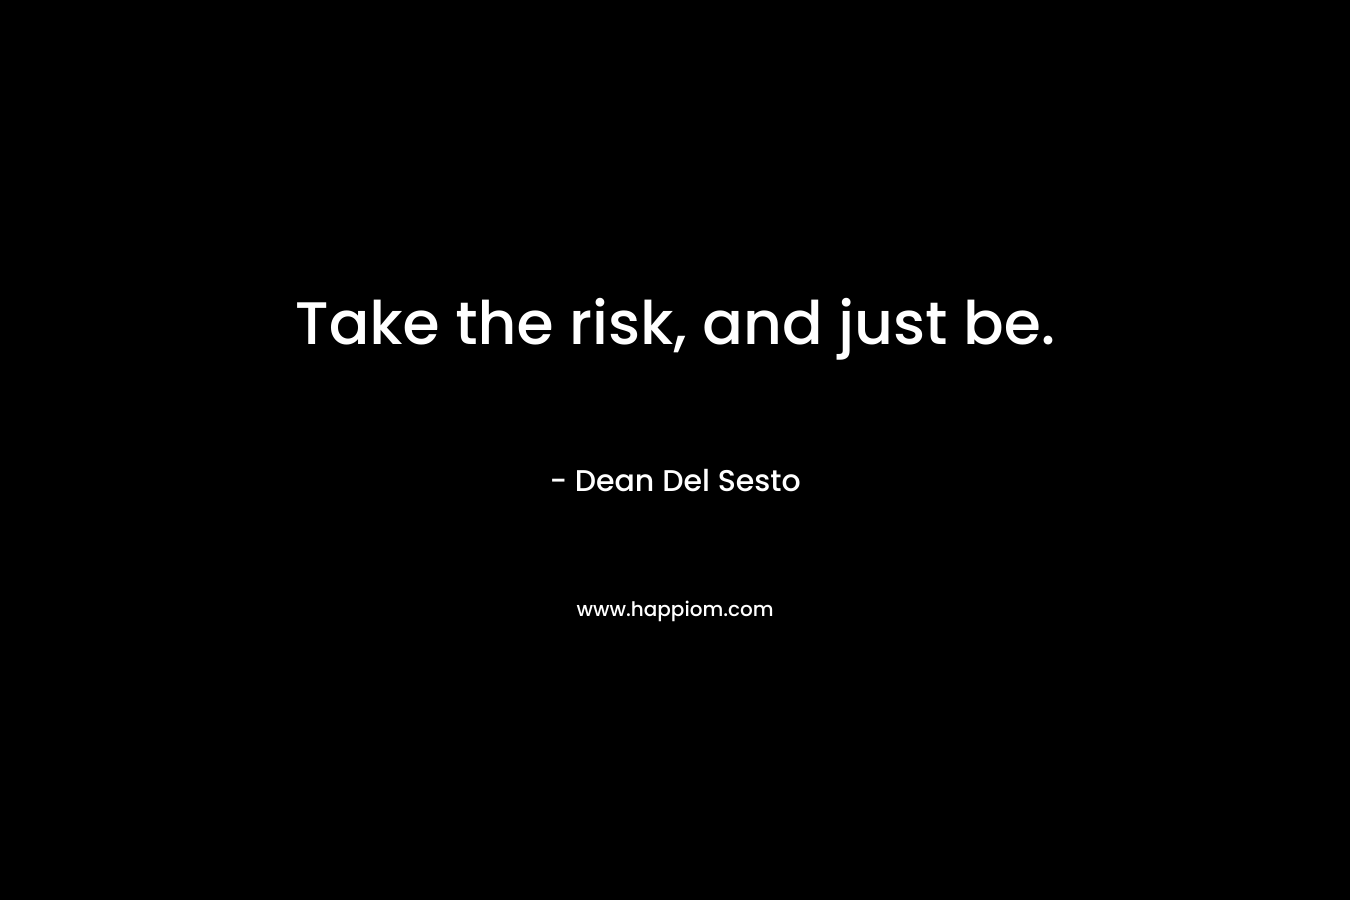 Take the risk, and just be. – Dean Del Sesto